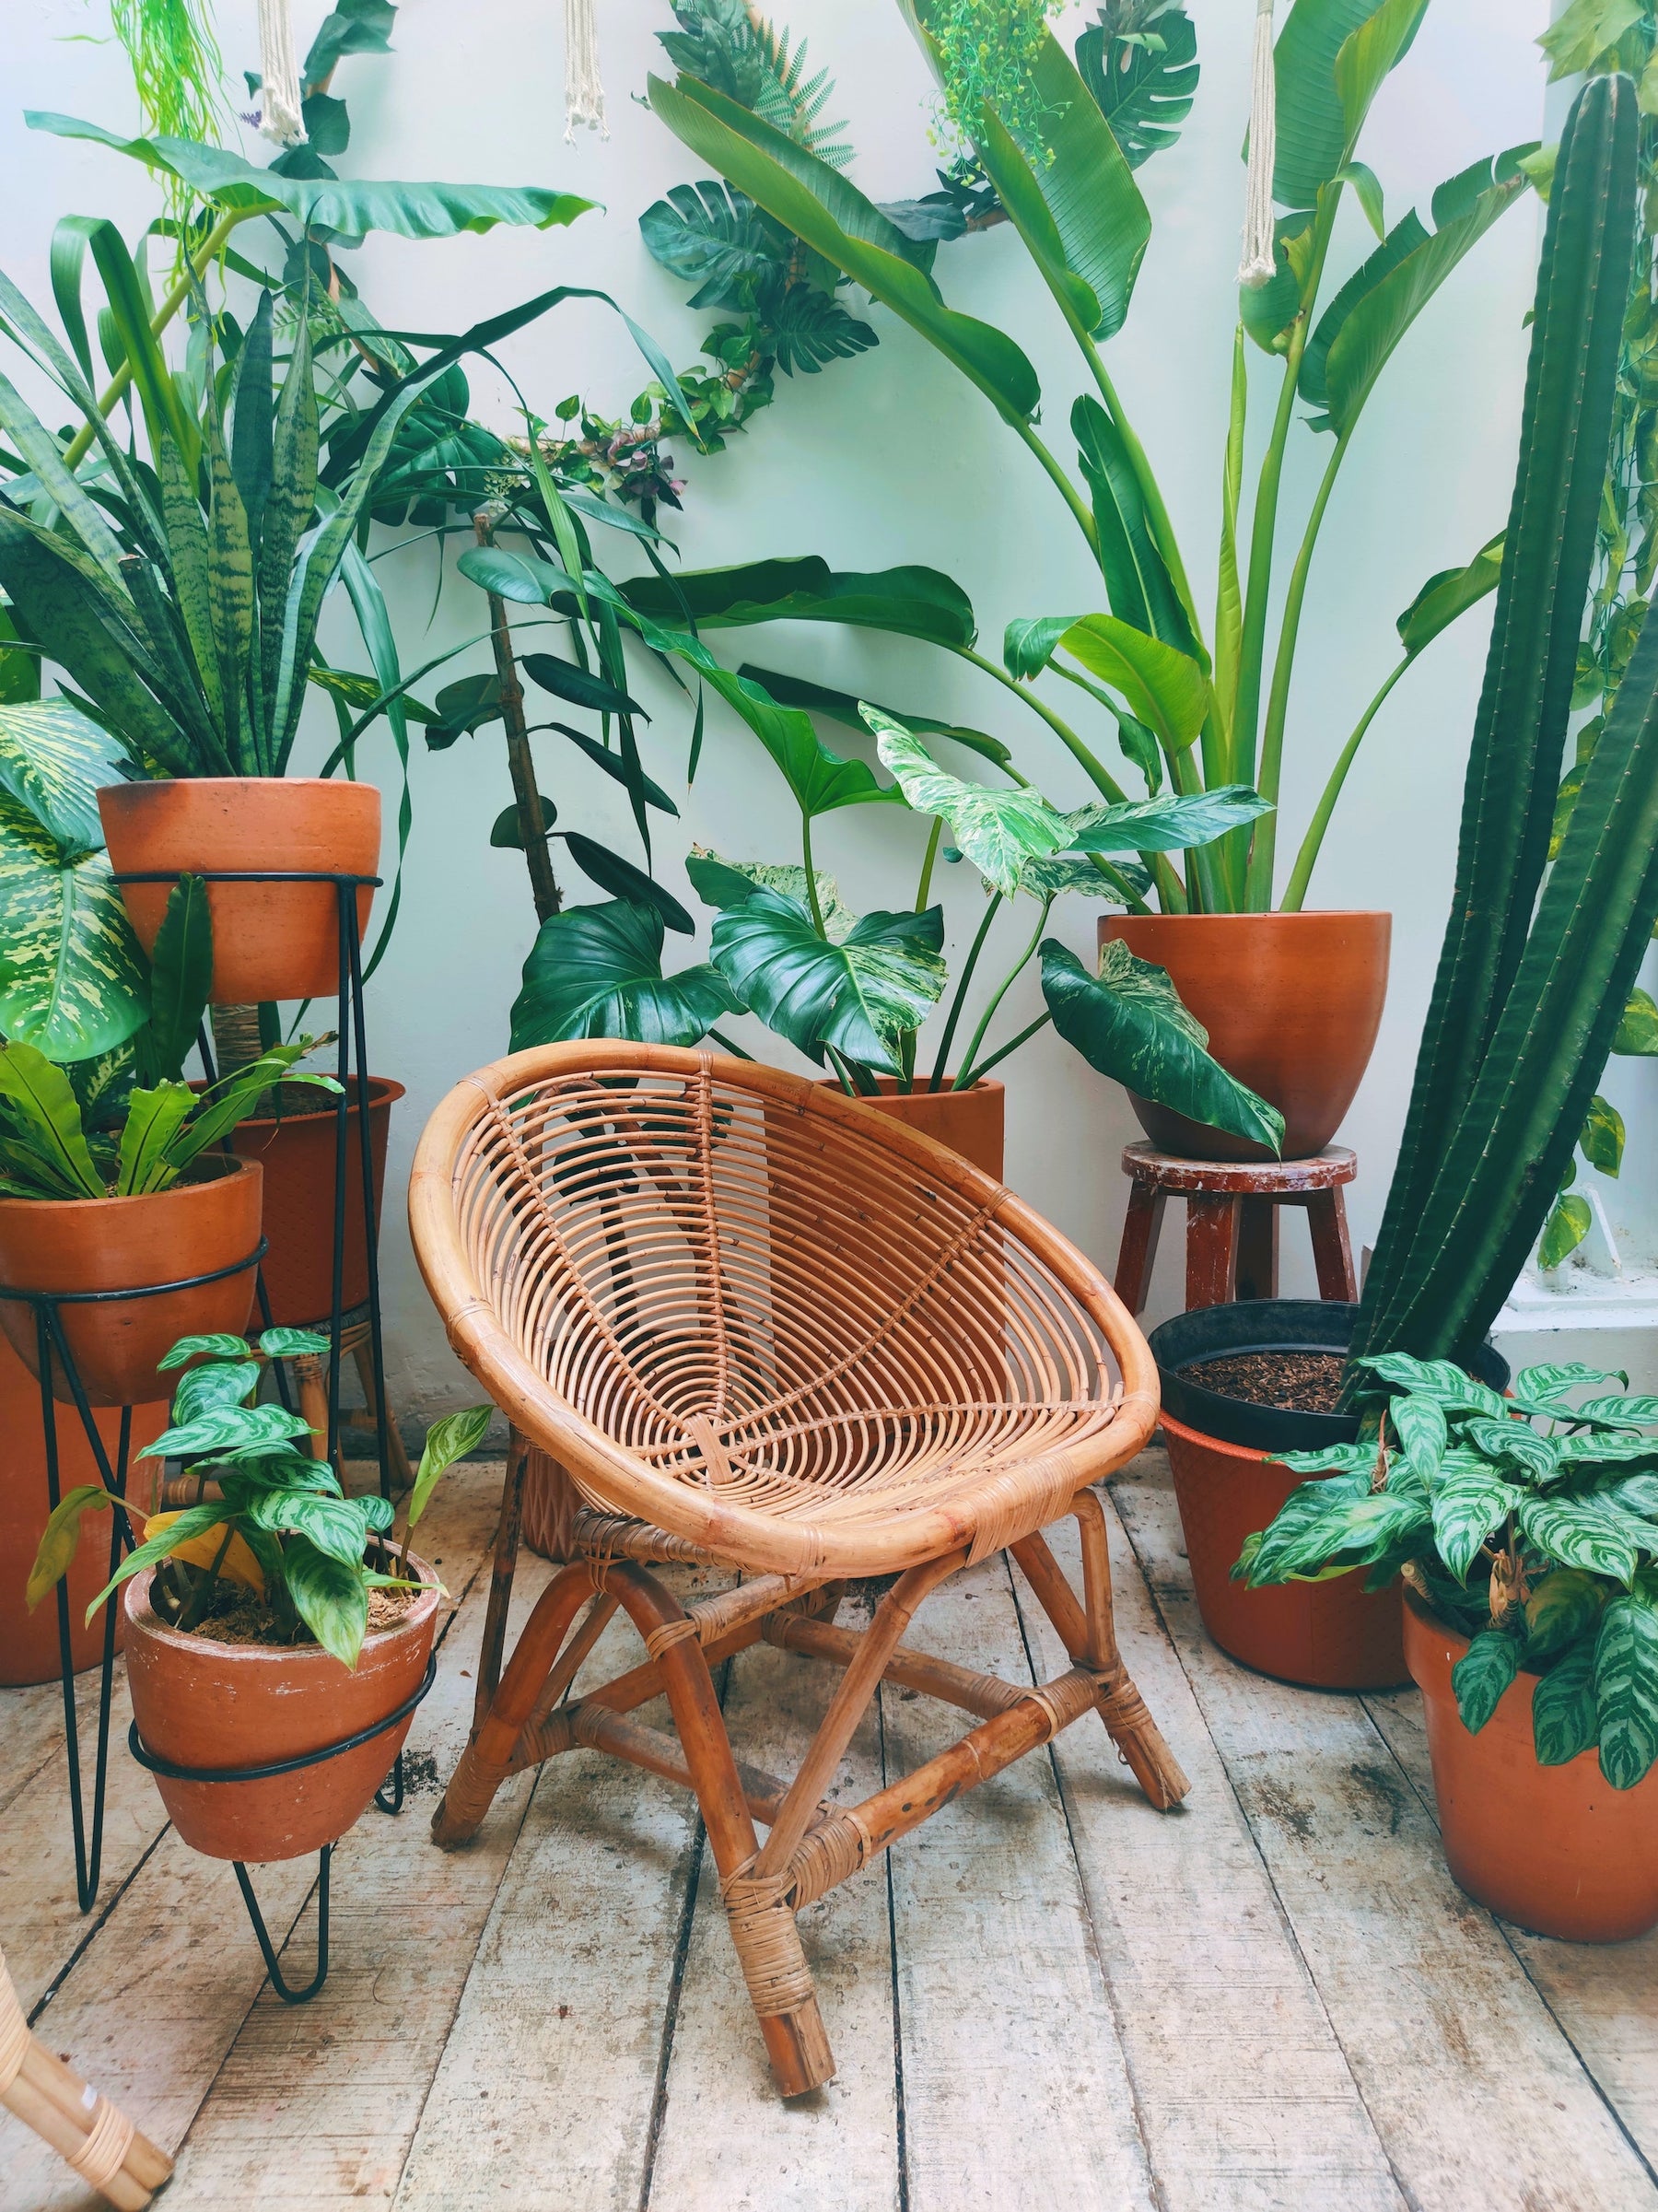 Make the most of your Space with these 7 Balcony Garden Tips